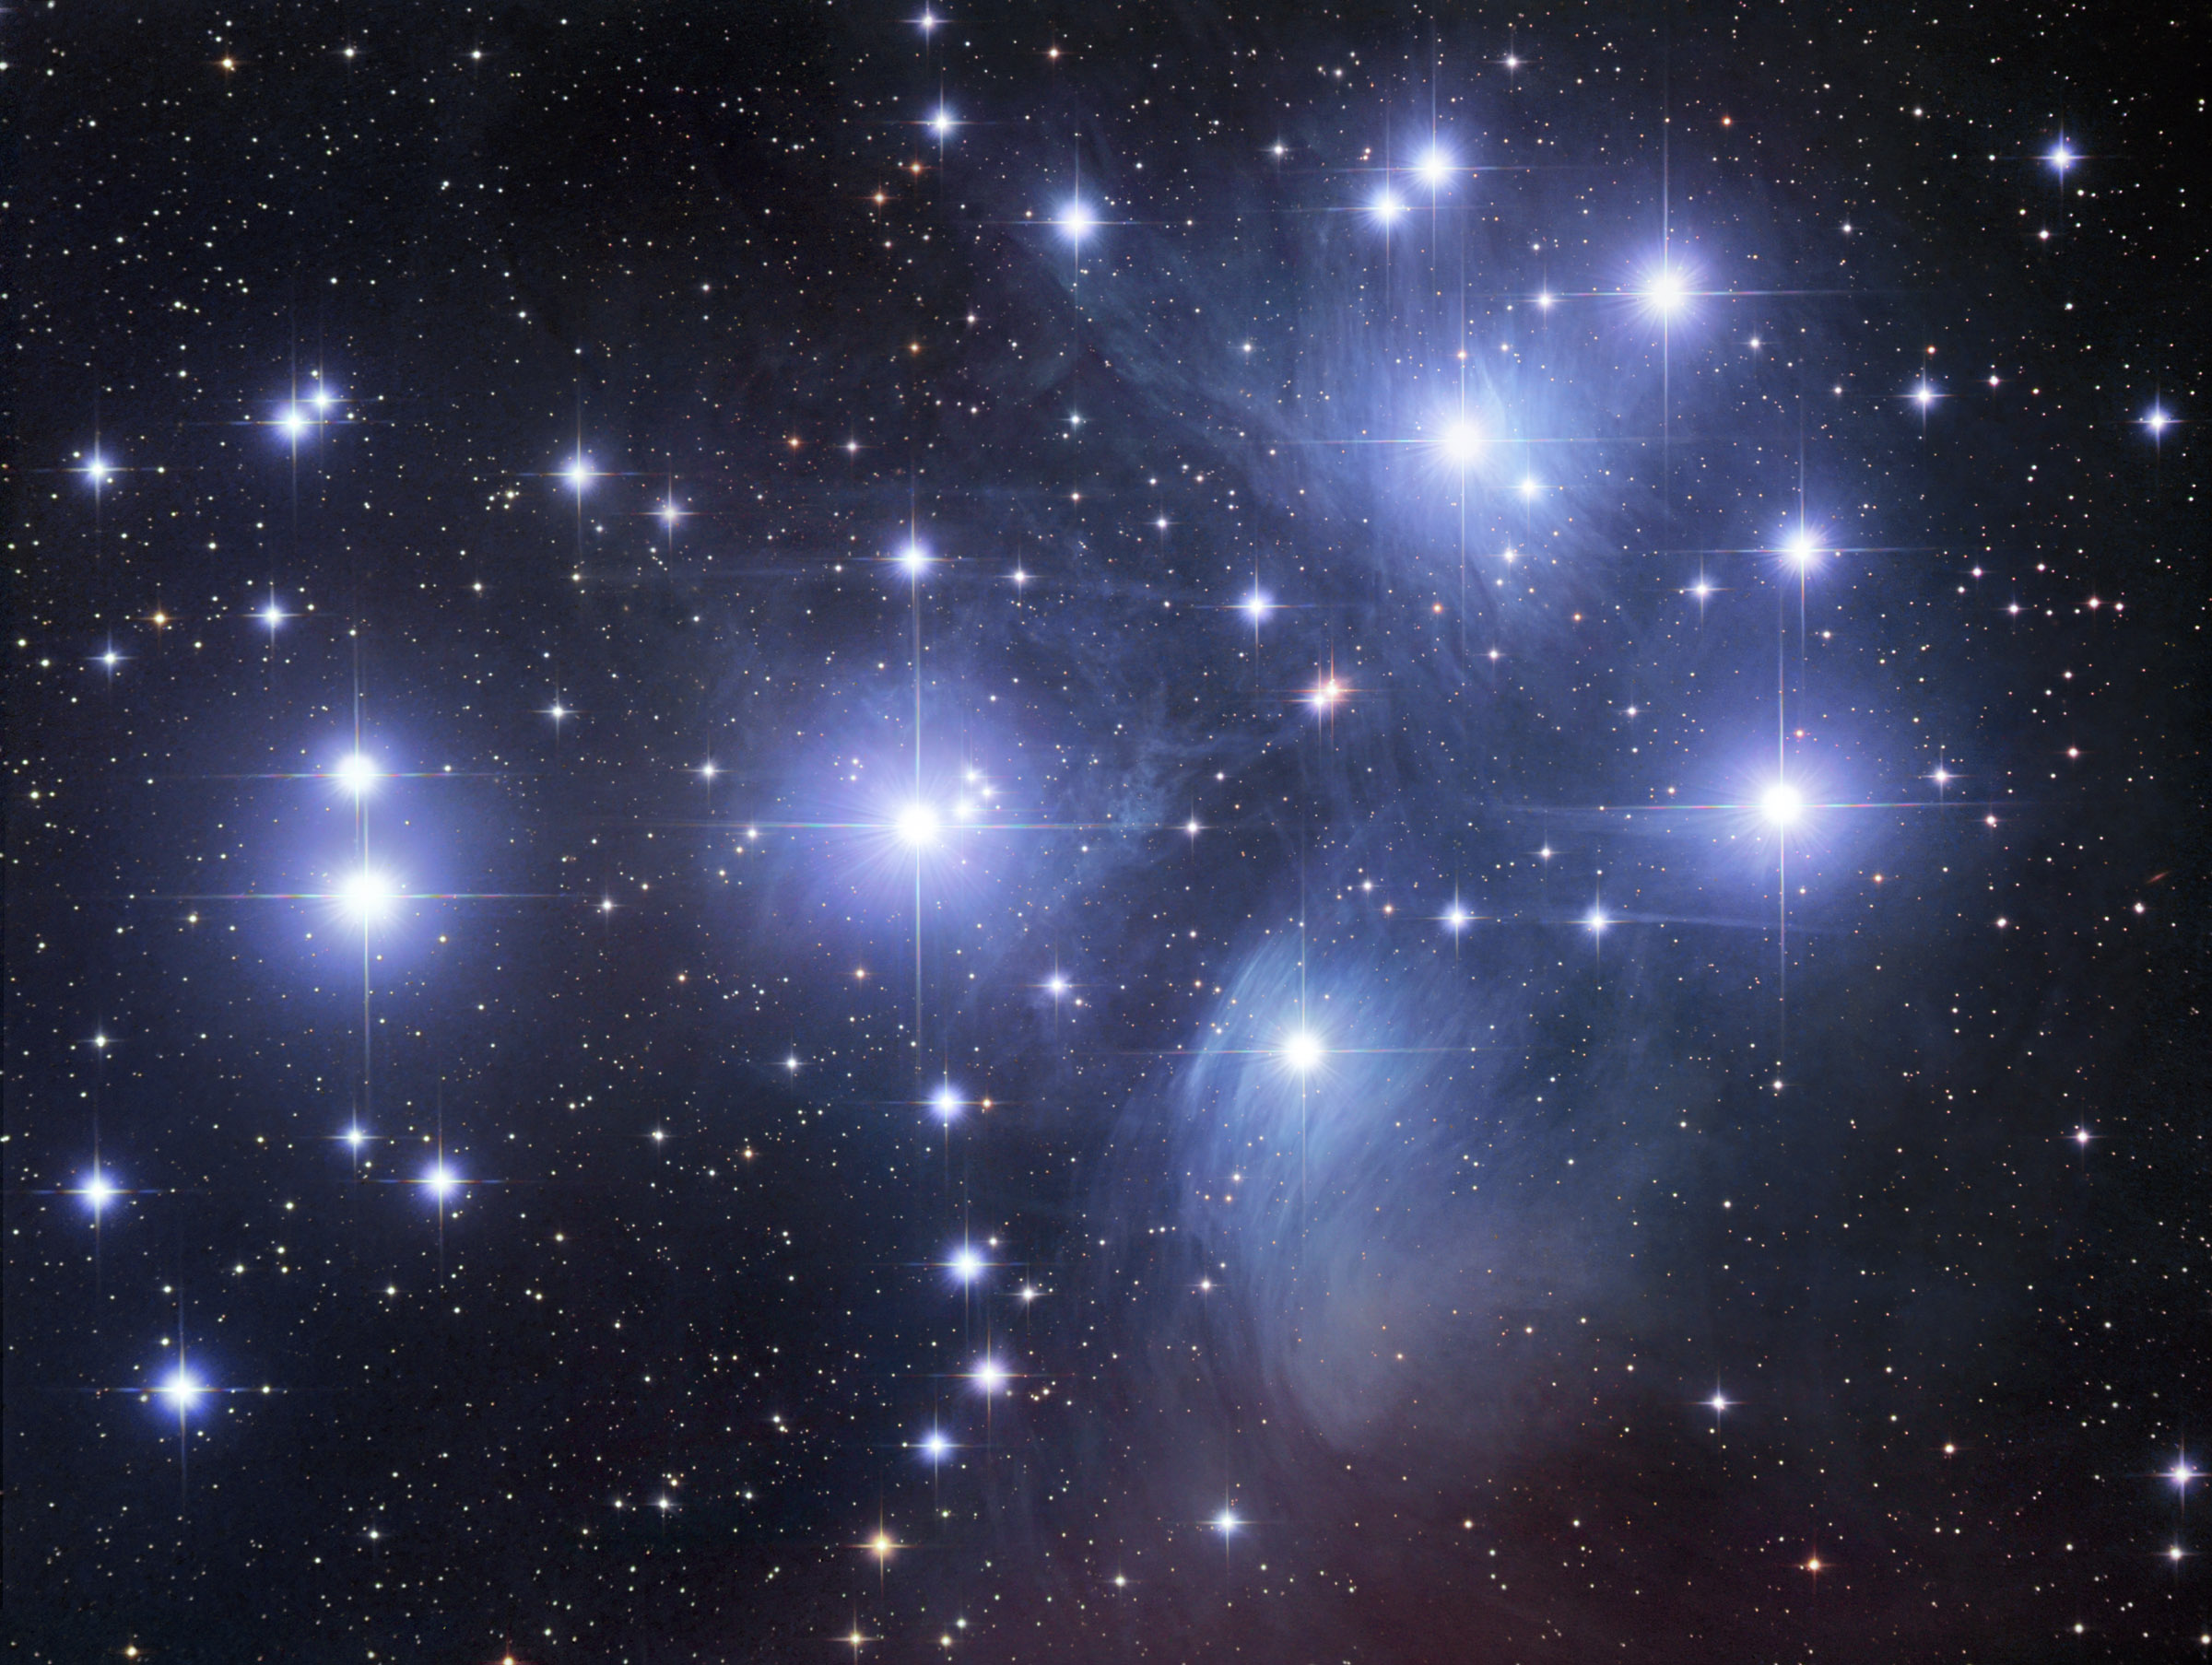 Stars making up the constellation of Pleiades